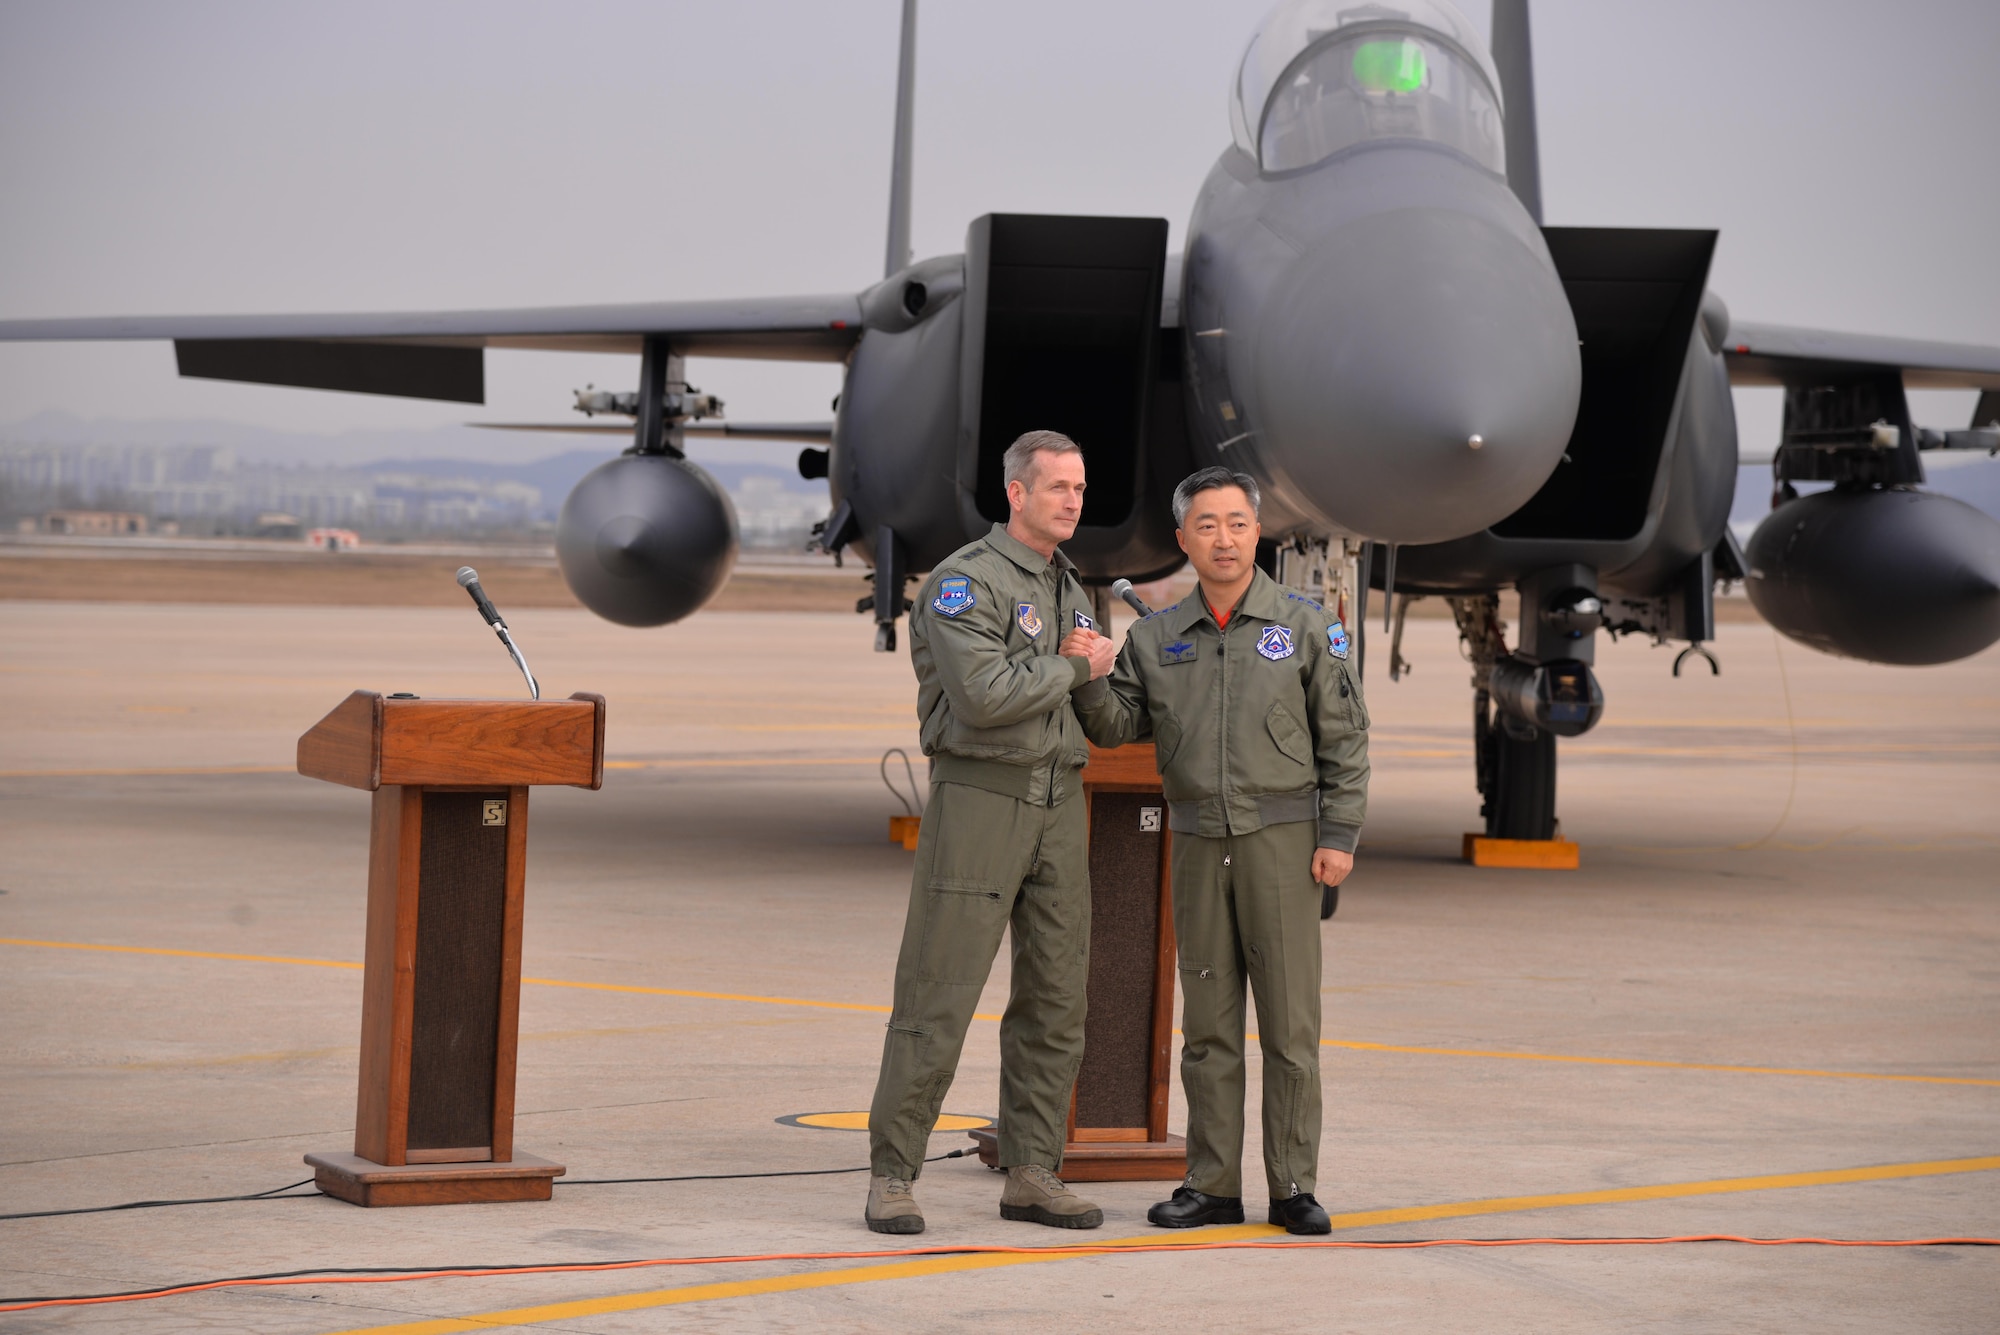 United Nations Command, U.S. Forces Korea deputy commander and U.S. 7th Air Force commander, Lt. Gen. Terrence O'Shaughnessy (right) and Lt. Gen. Wang-keon Lee, ROK Air Force Operations Command commander (left), speak to Korean and international media at Osan Air Base, South Korea, Jan. 10, 2016, prior to a low-level pass from a U.S. Air Force B-52 Stratofortress in response to recent provocative action by North Korea. The B-52 was joined by a ROKAF F-15 Slam Eagle and a U.S. Air Force F-16 Fighting Falcon. The B-52 is a is a long-range, heavy bomber that can fly up to 50,000 feet and has the capability to carry 70,000 pounds of nuclear or precision guided conventional ordnance with worldwide precision navigation capability. (U.S. Air Force photo/Staff Sgt. Benjamin Sutton)